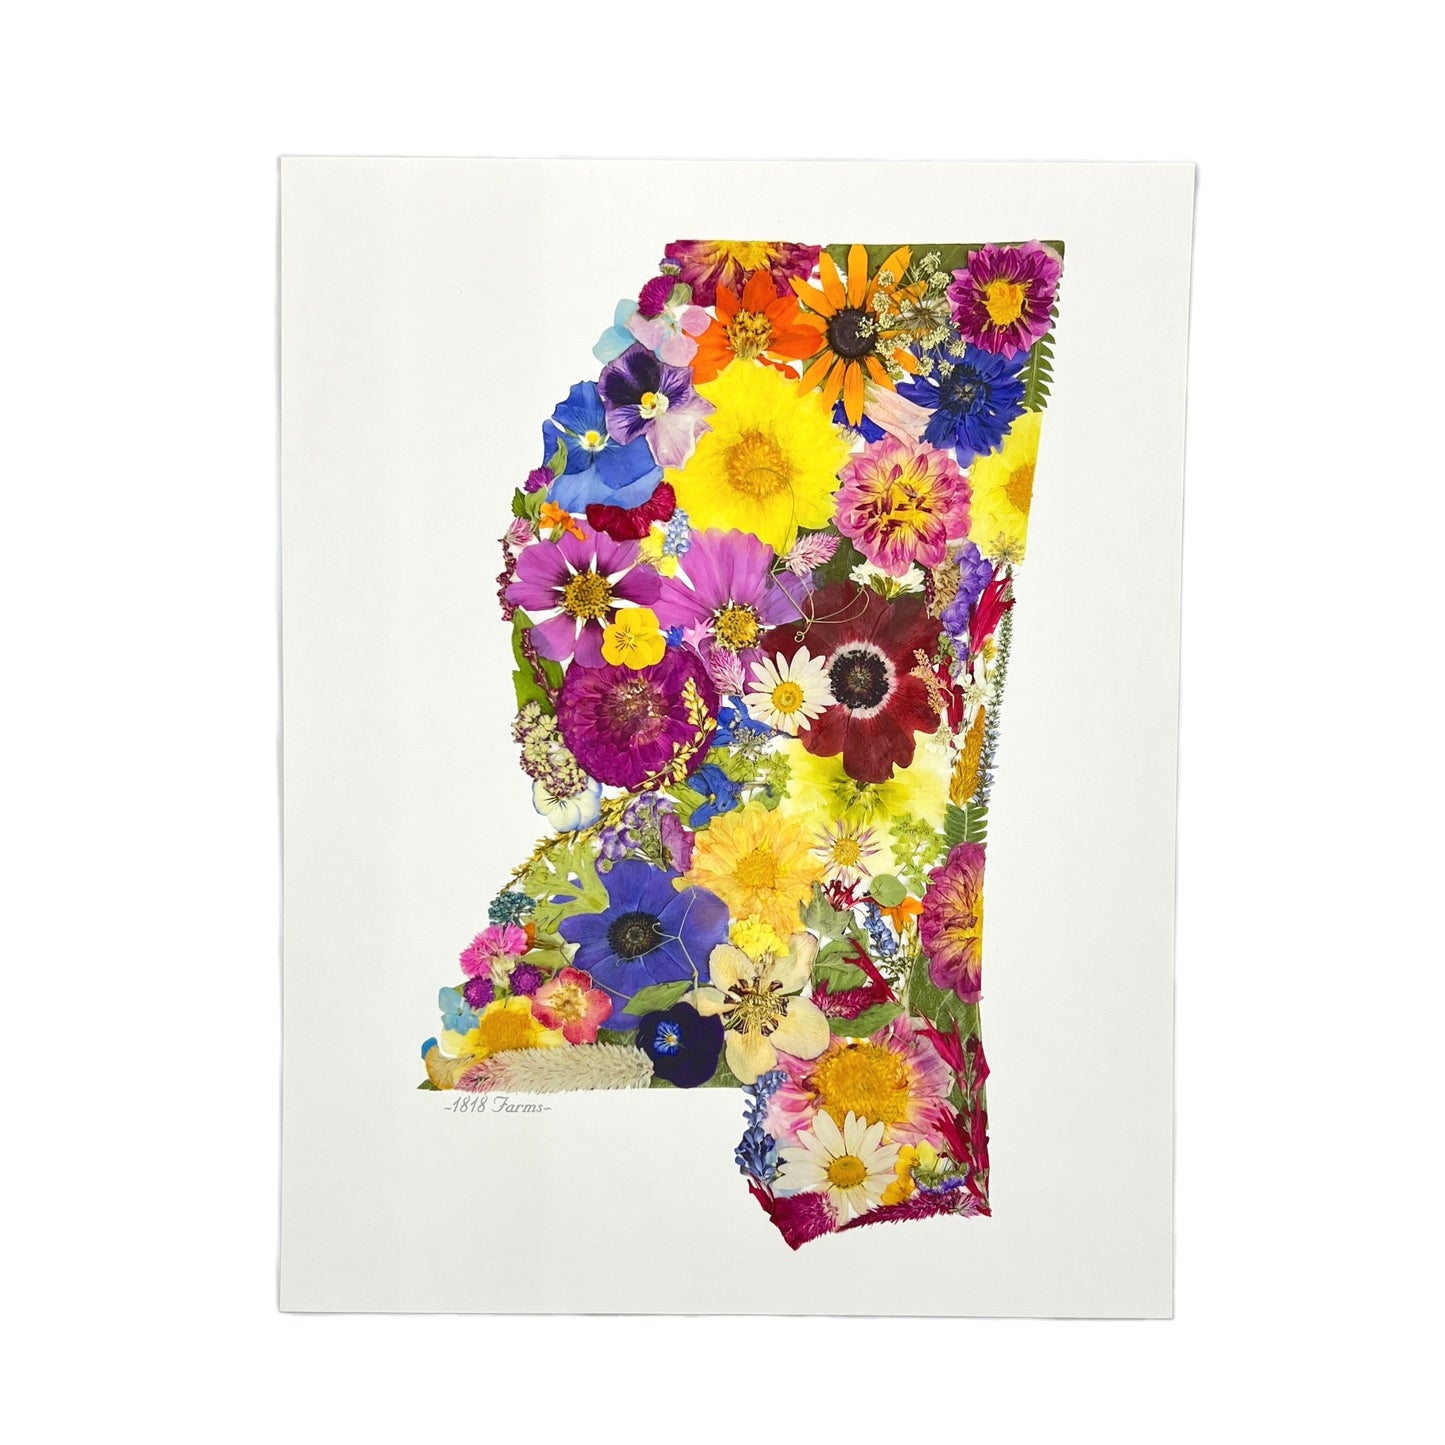 State Themed Giclée Print  - "Where I Bloom" Collection Giclee Art Print 1818 Farms 8"x10" Mississippi 